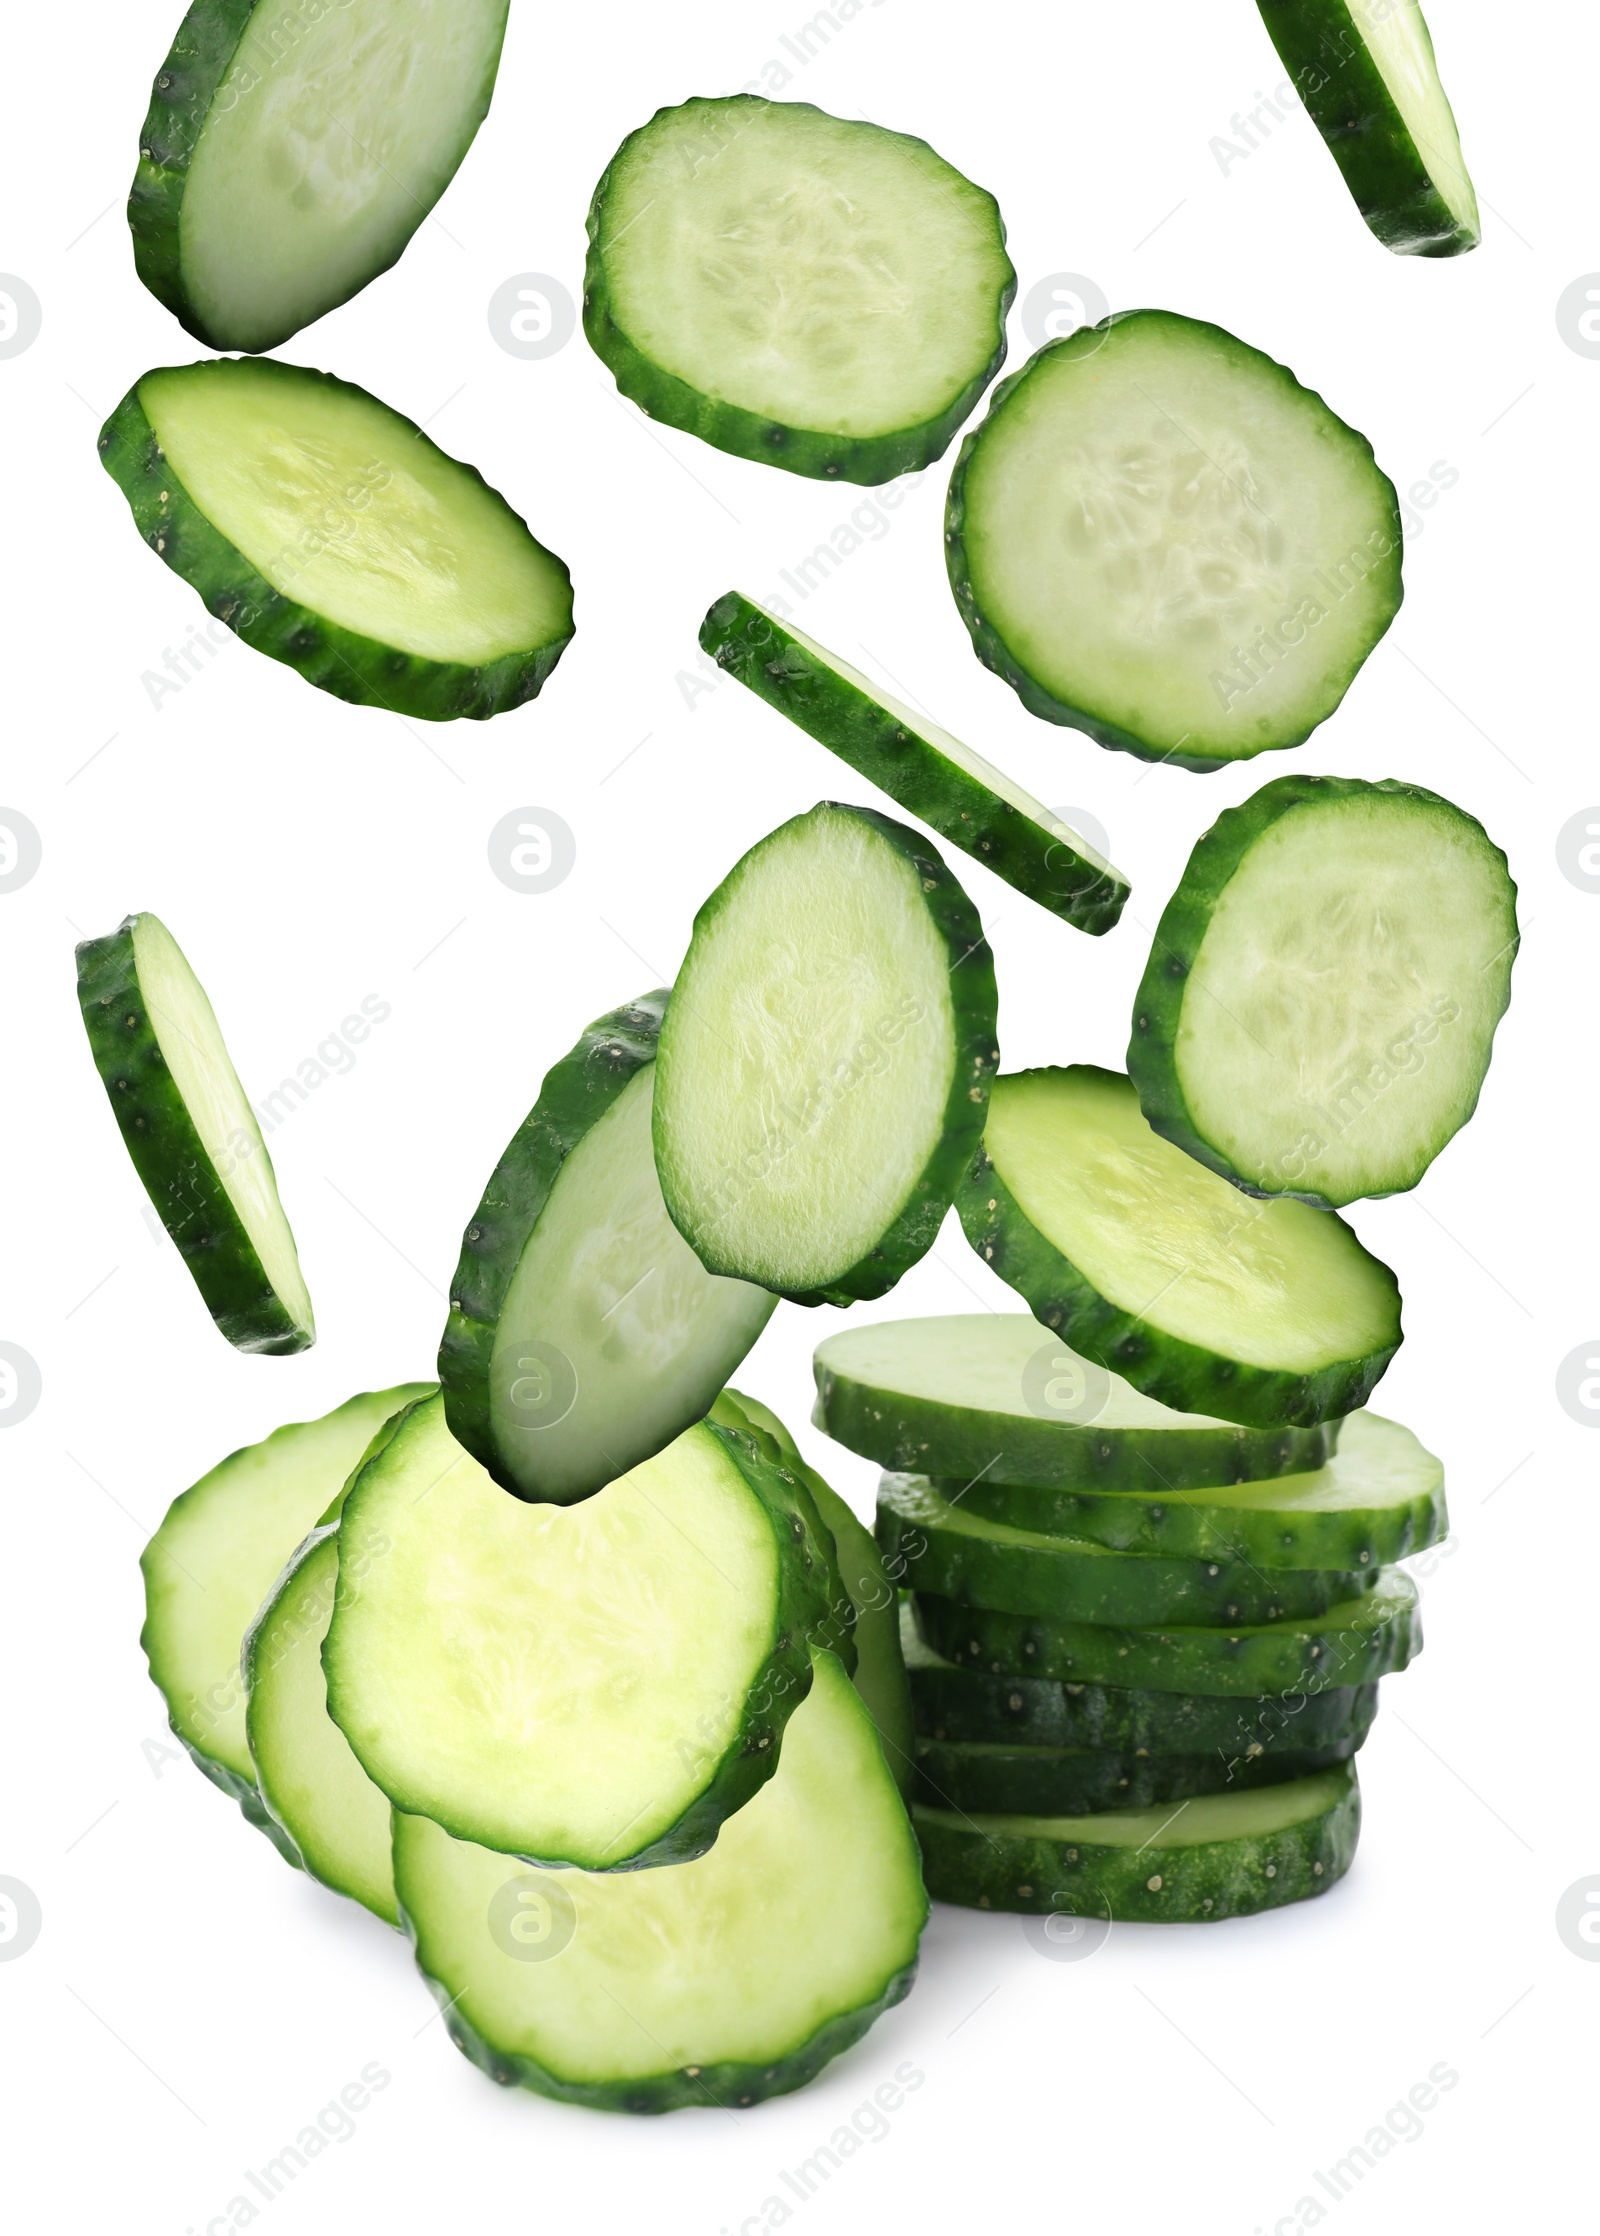 Image of Slices of fresh green cucumbers falling on white background